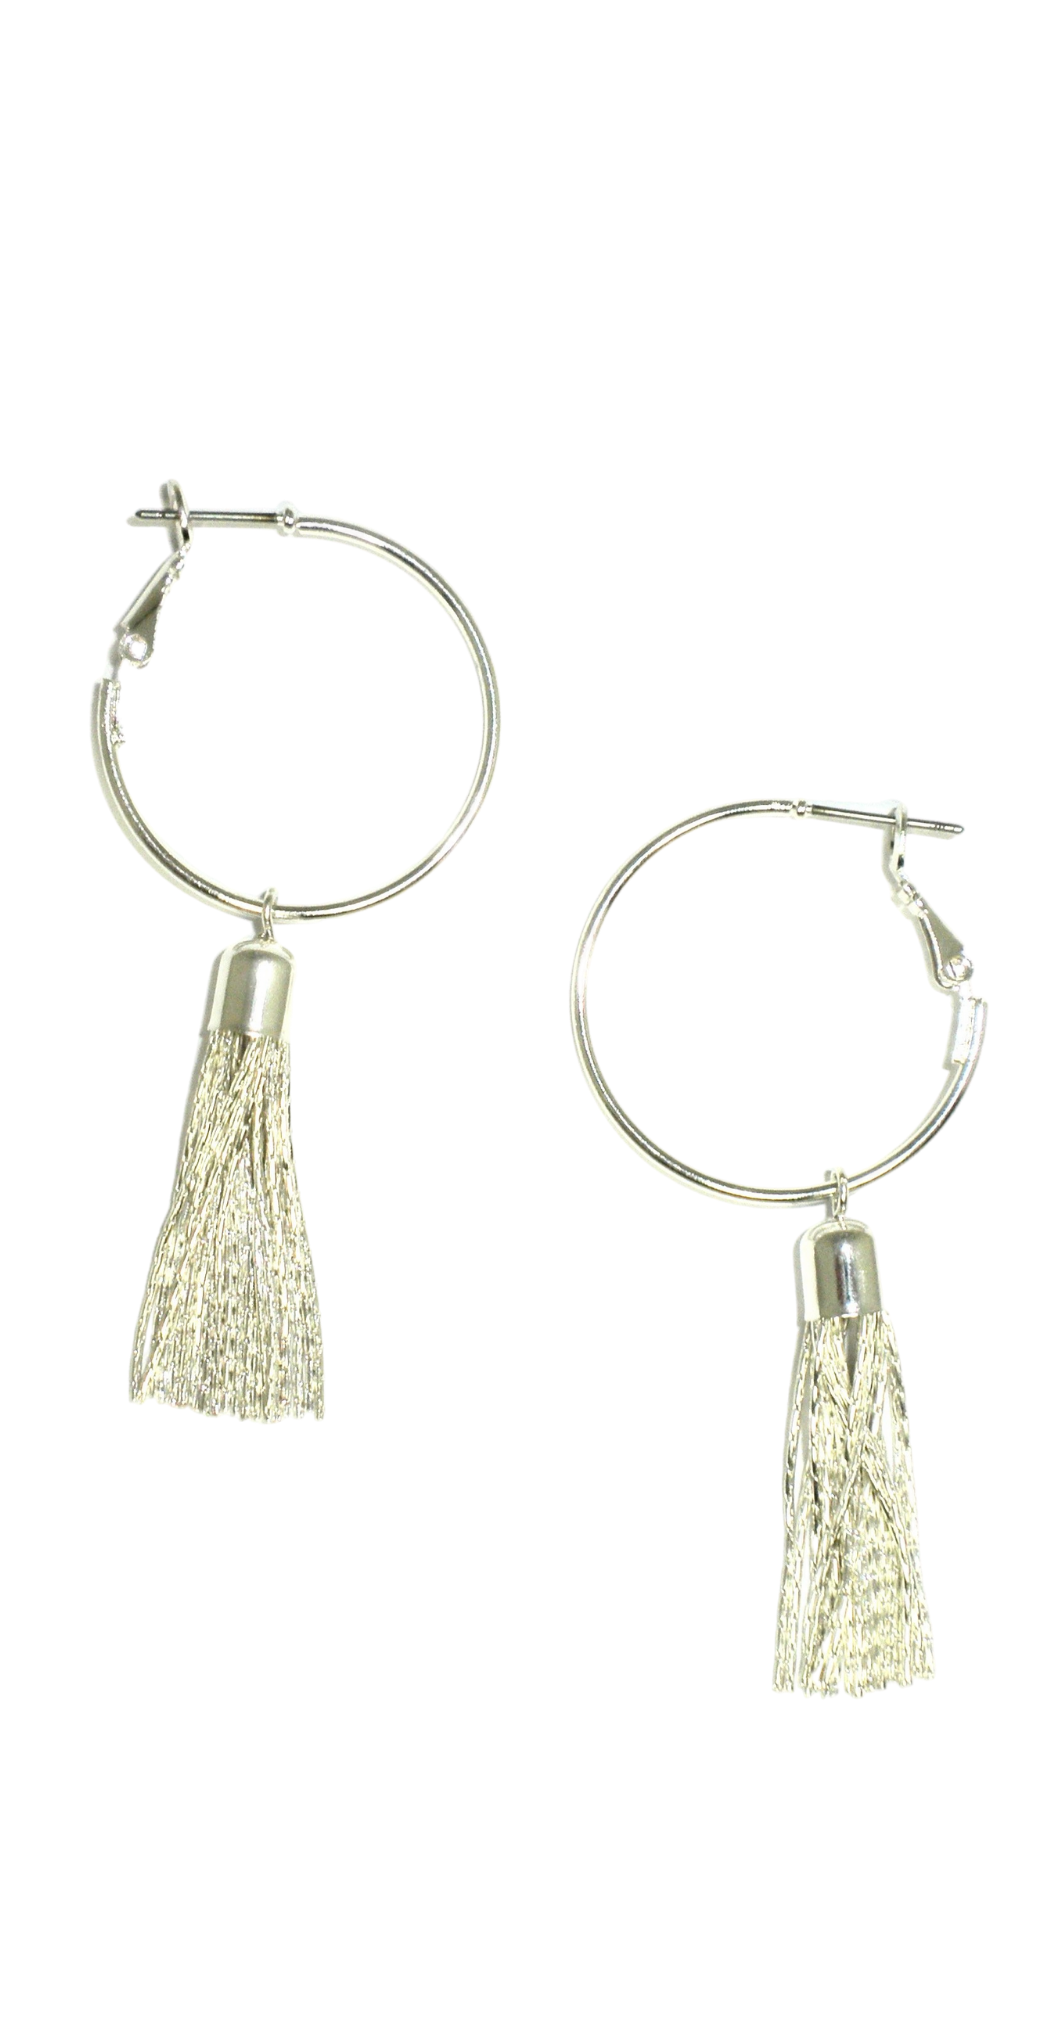 Silver Hoop Earrings with Silver Tassels - The Fashion Foundation - {{ discount designer}}